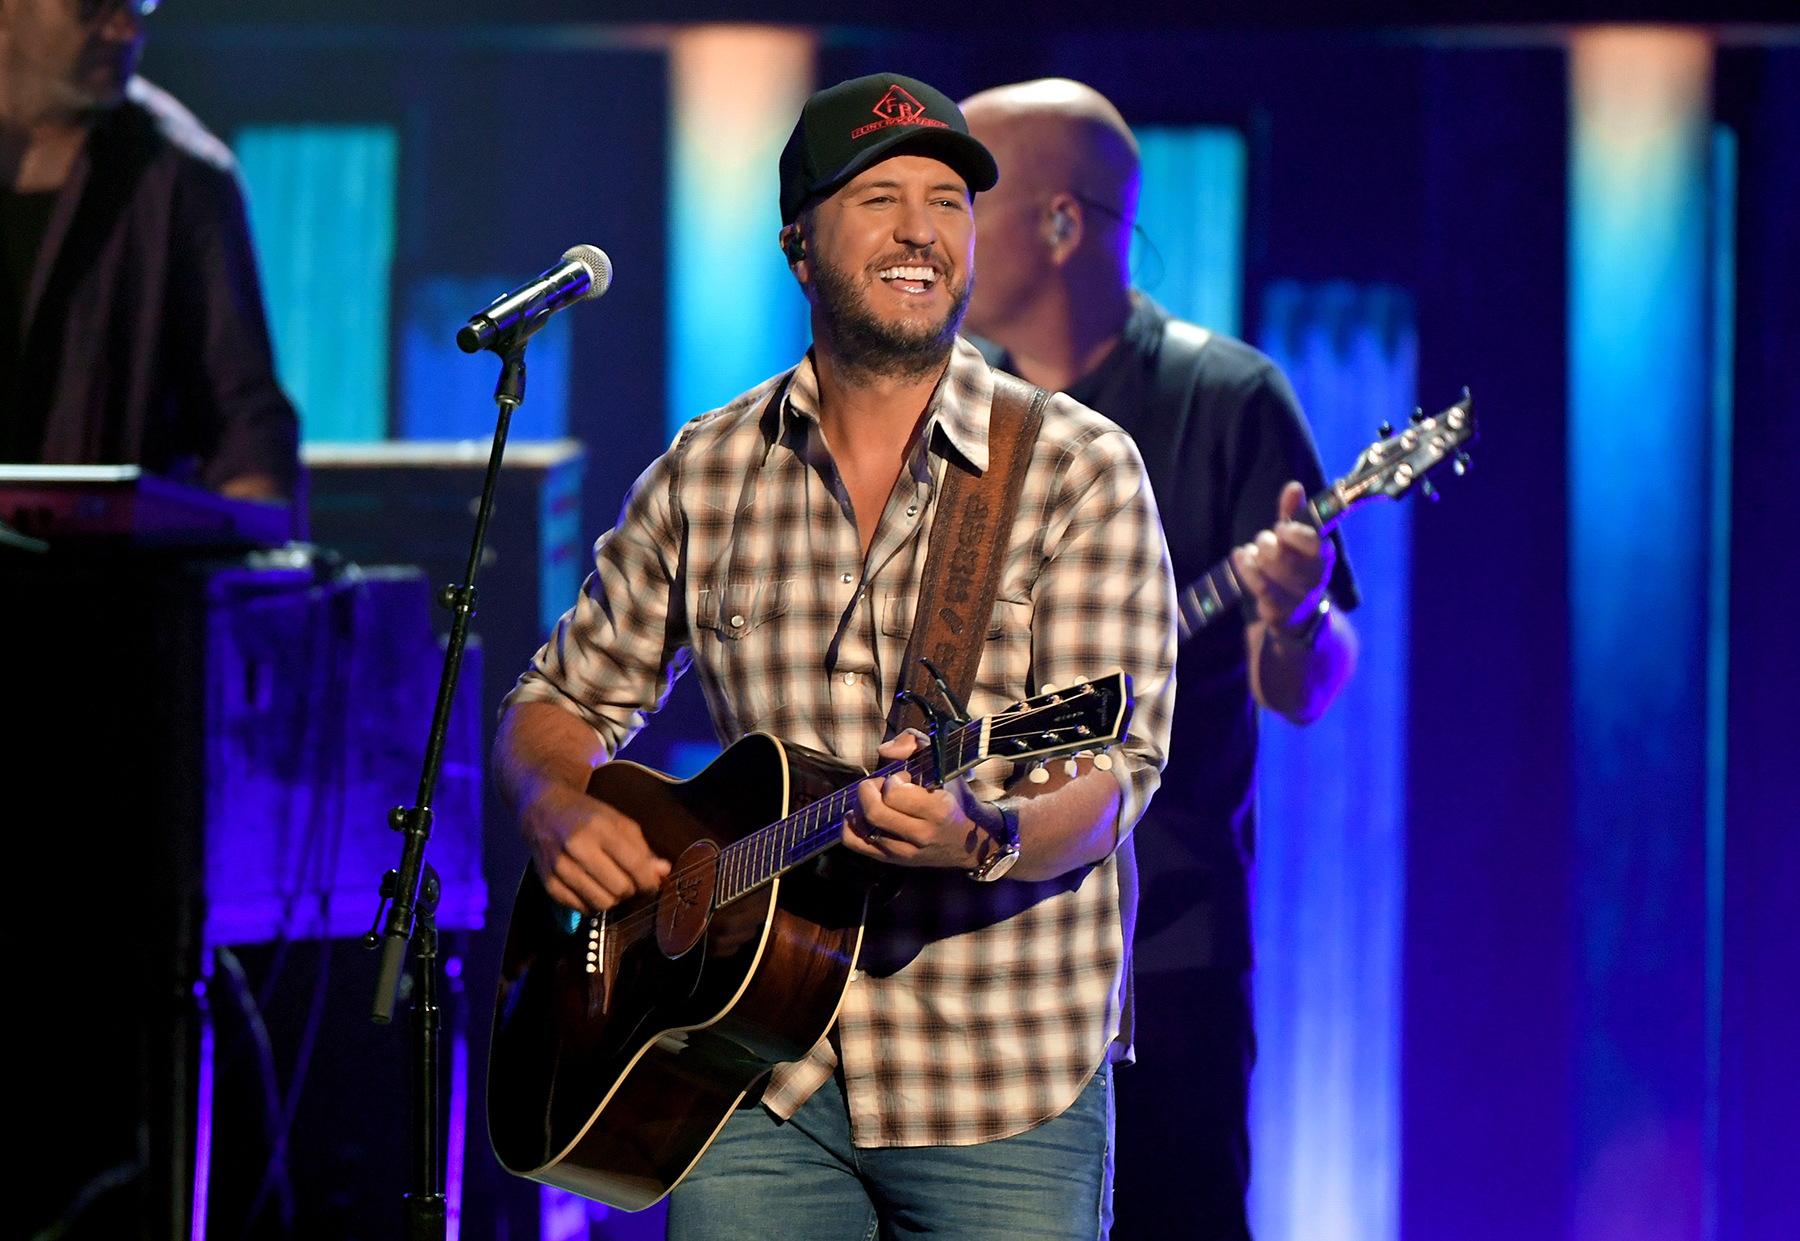 Luke Bryan Announces His “RAISED UP RIGHT TOUR” for 2022 with Riley Green and Mitchell Tenpenny